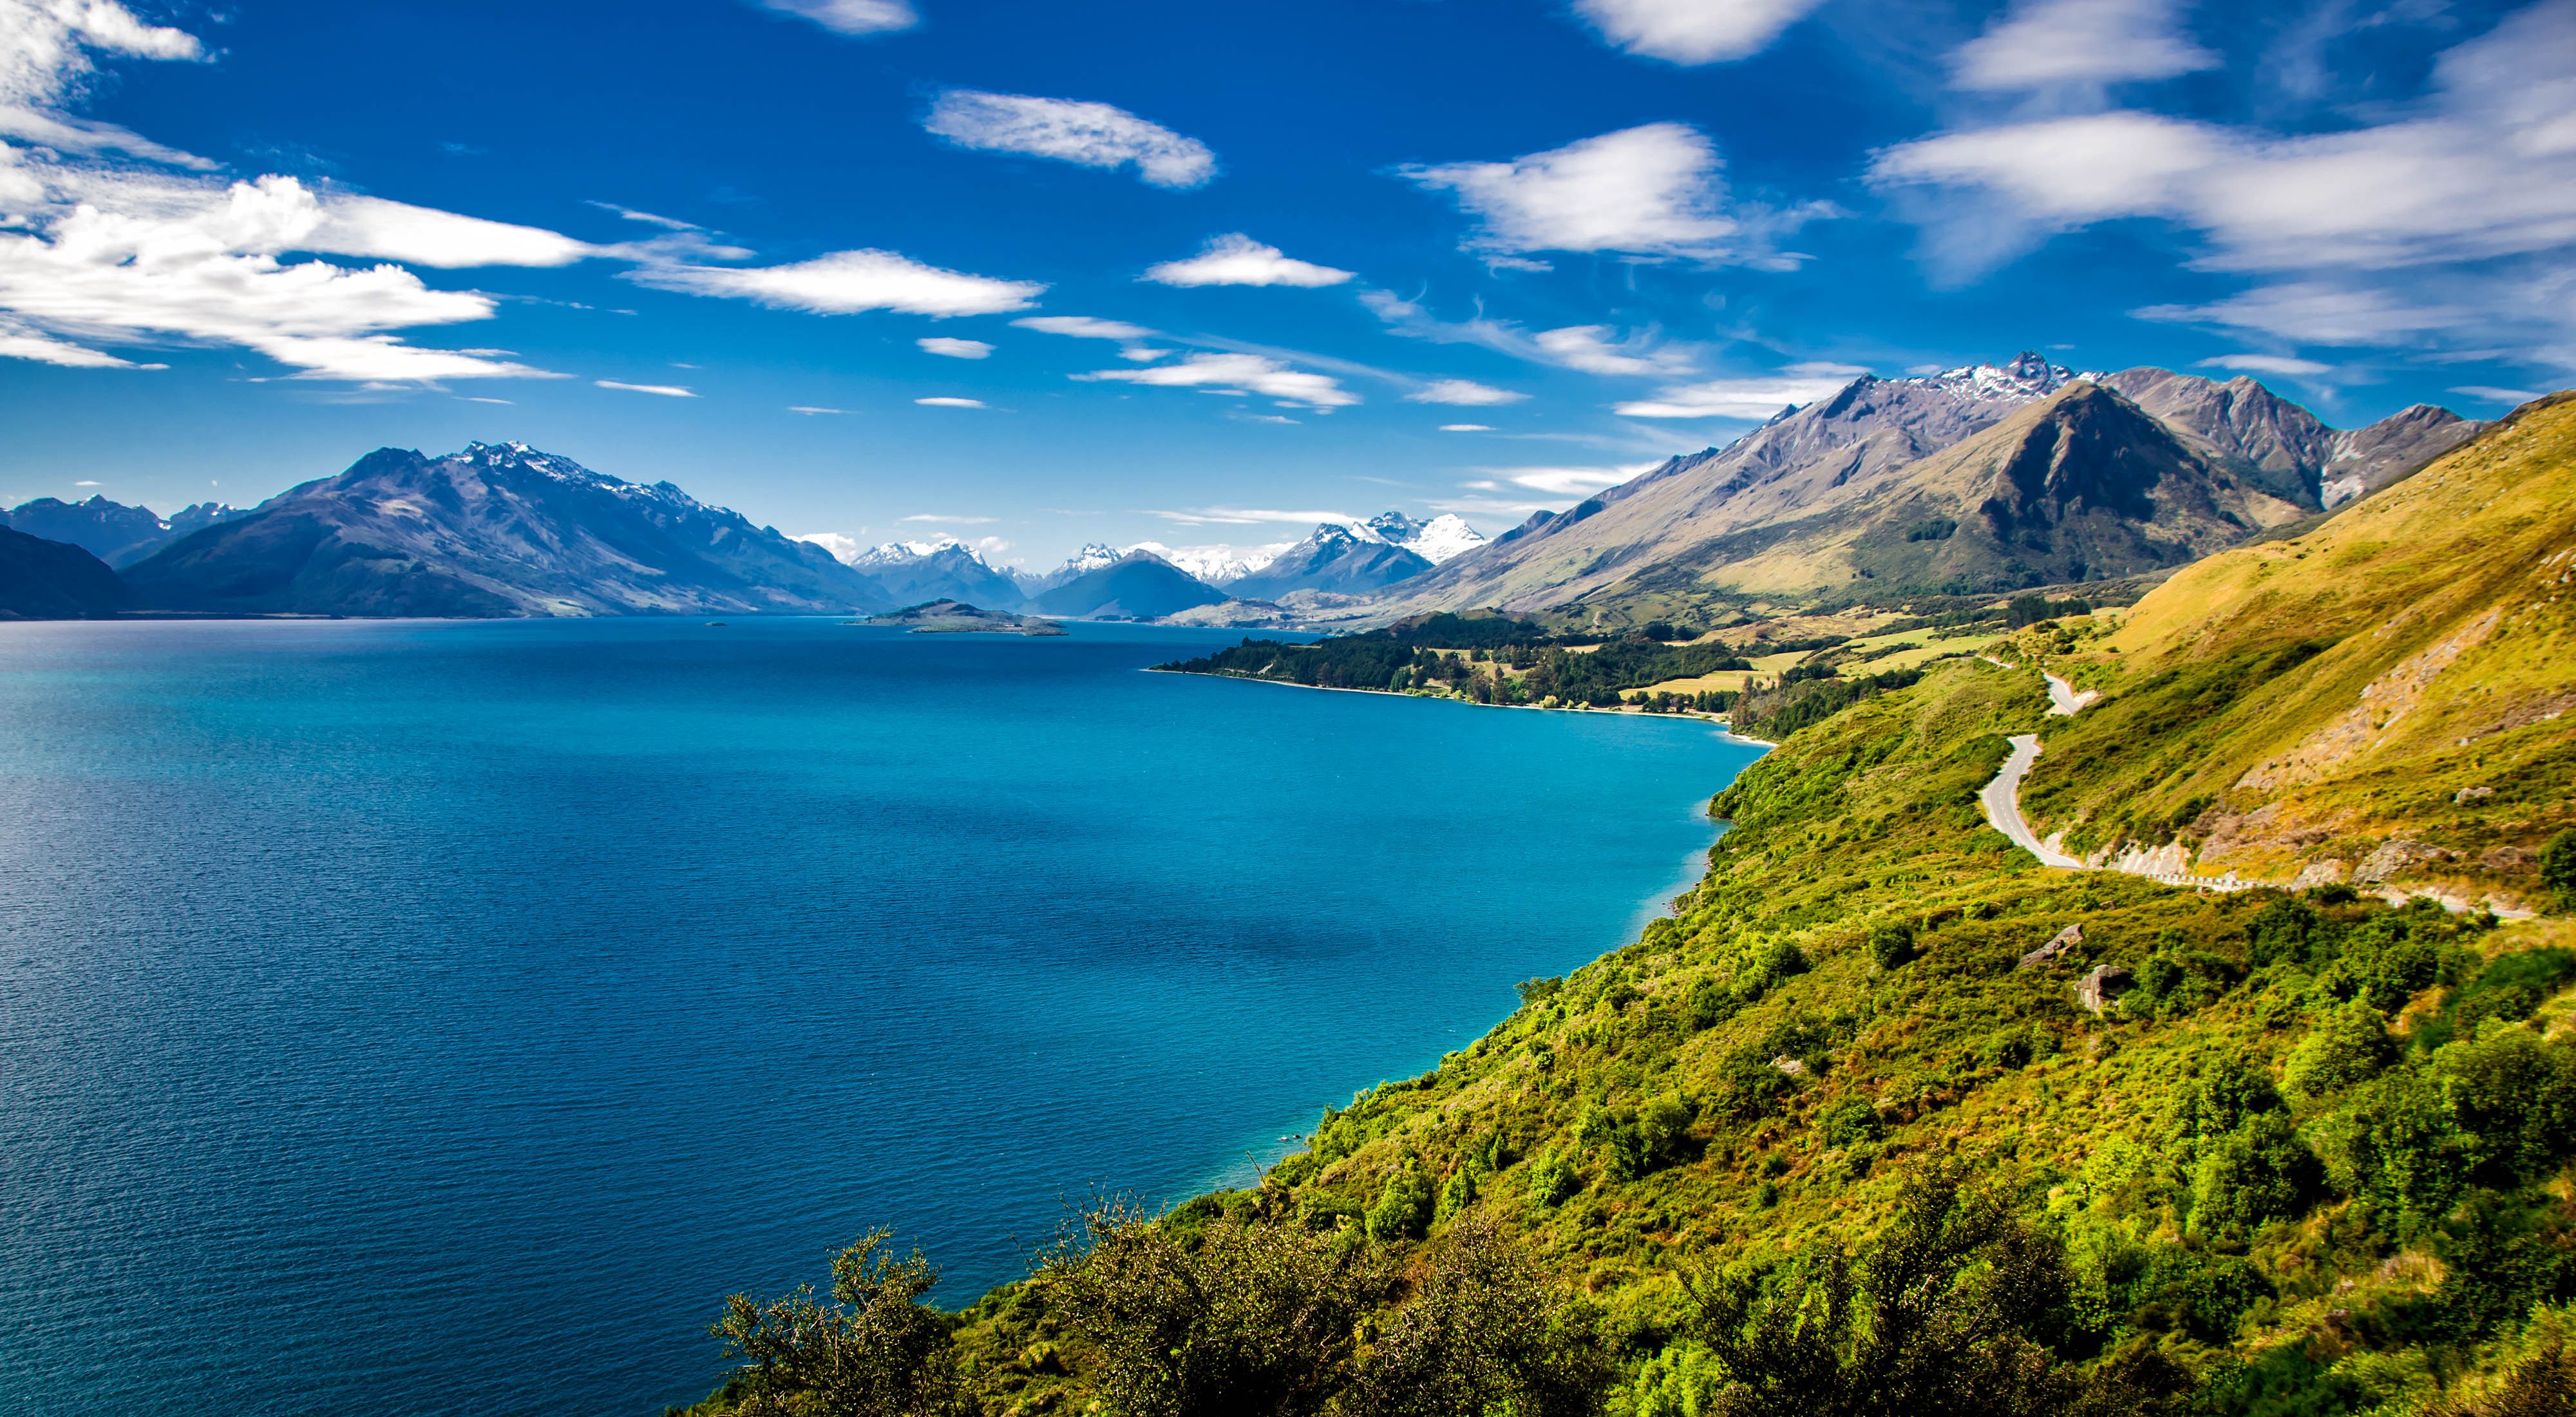 Summer view of Lake Wakatipu and the road from Queenstown to Glenorchy.  Southern Alps mountains in the distance.